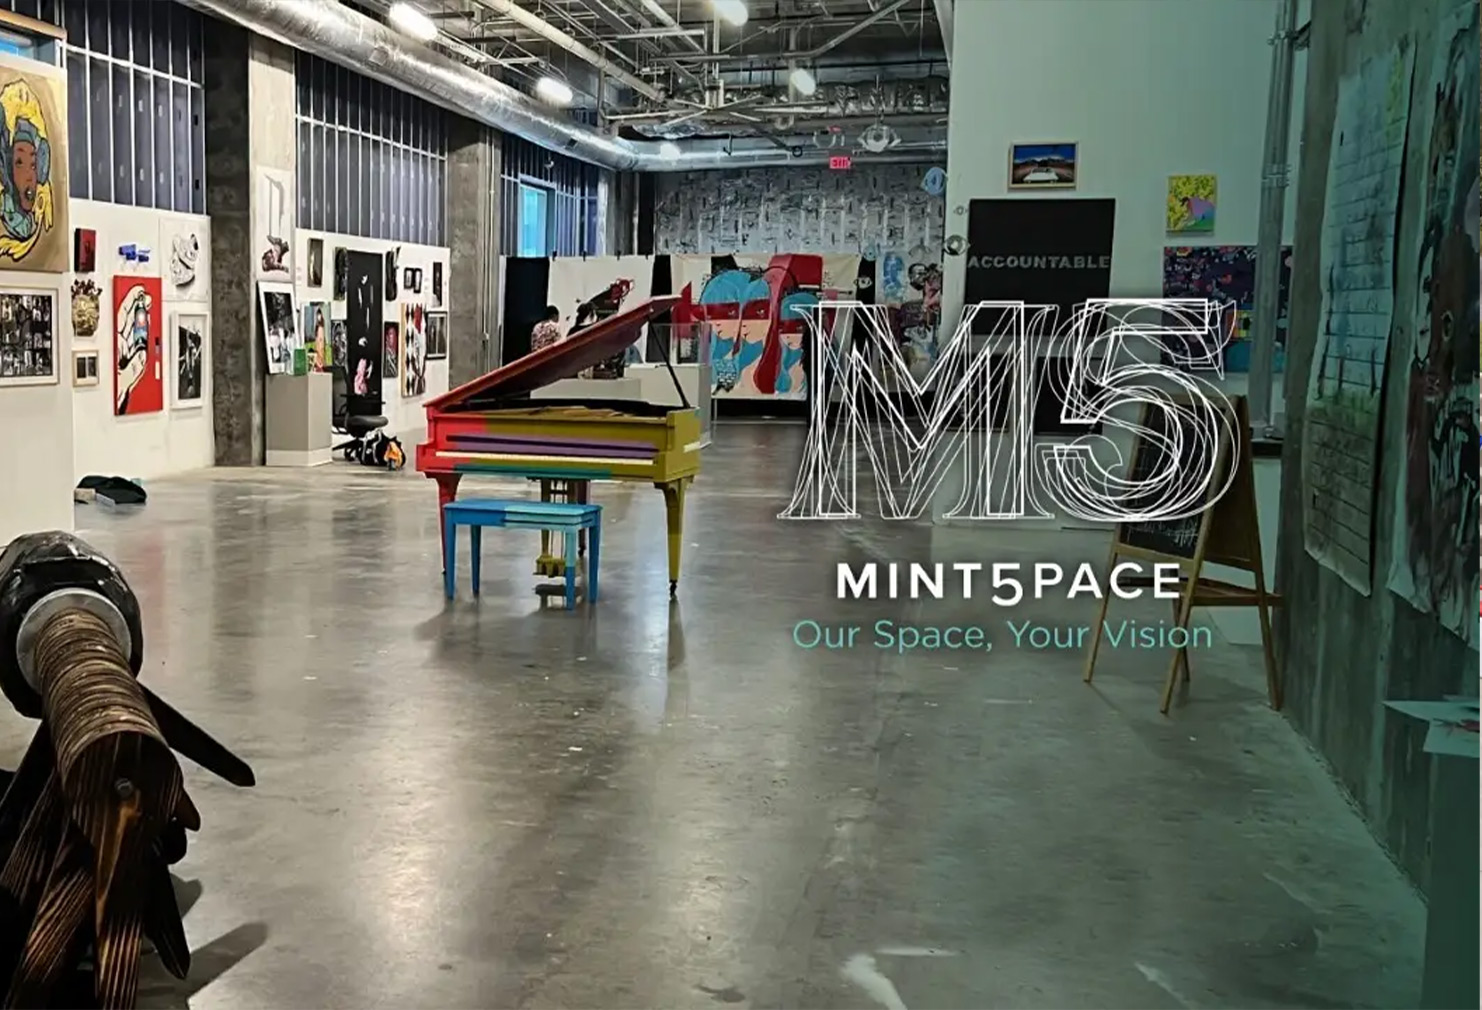 MINT5pace: Our Space, Your Vision